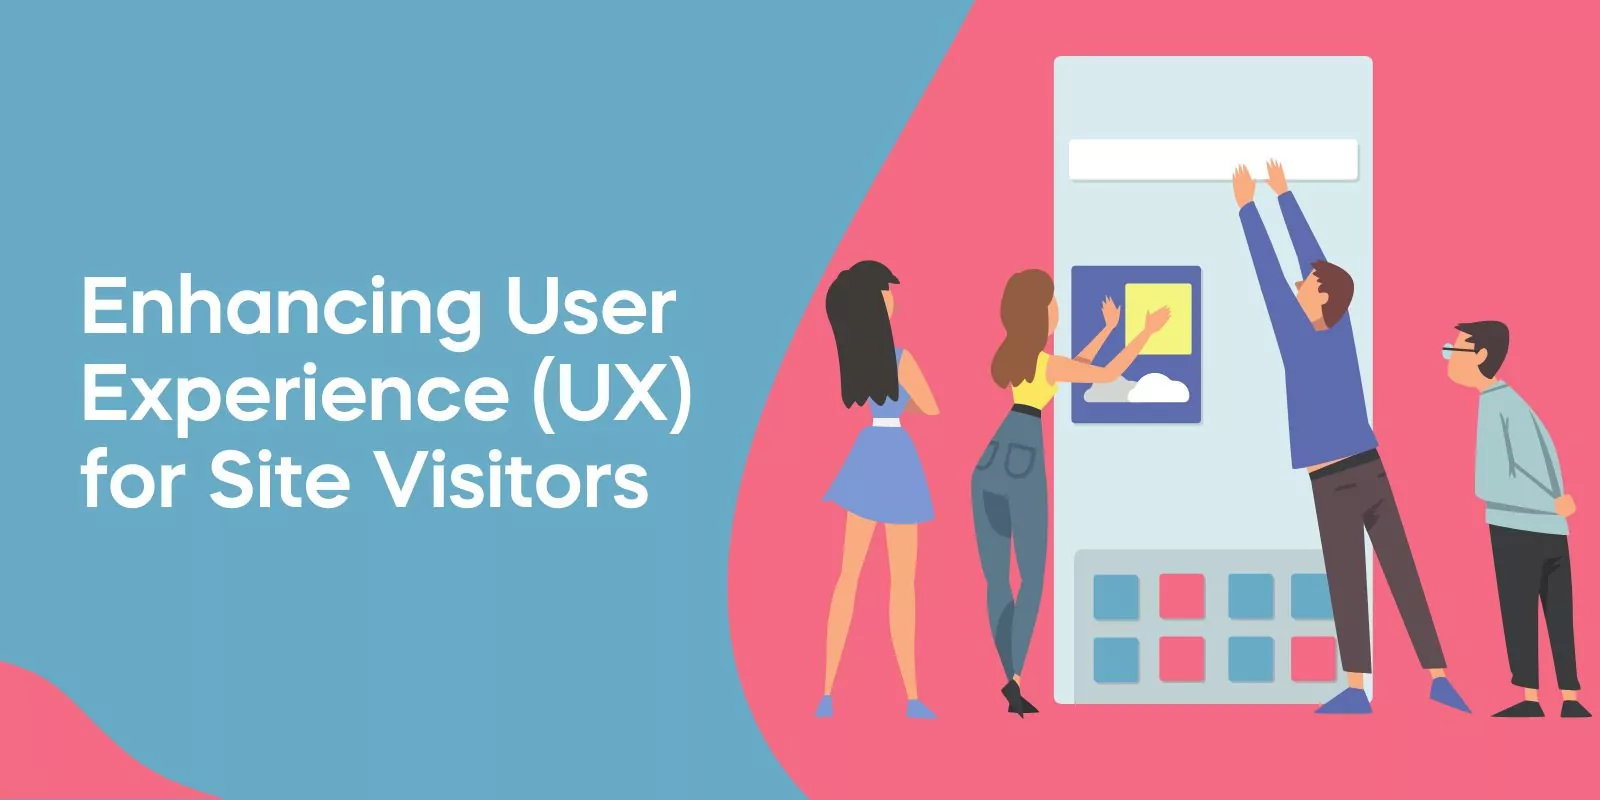 Enhancing User Experience (UX) for Site Visitors